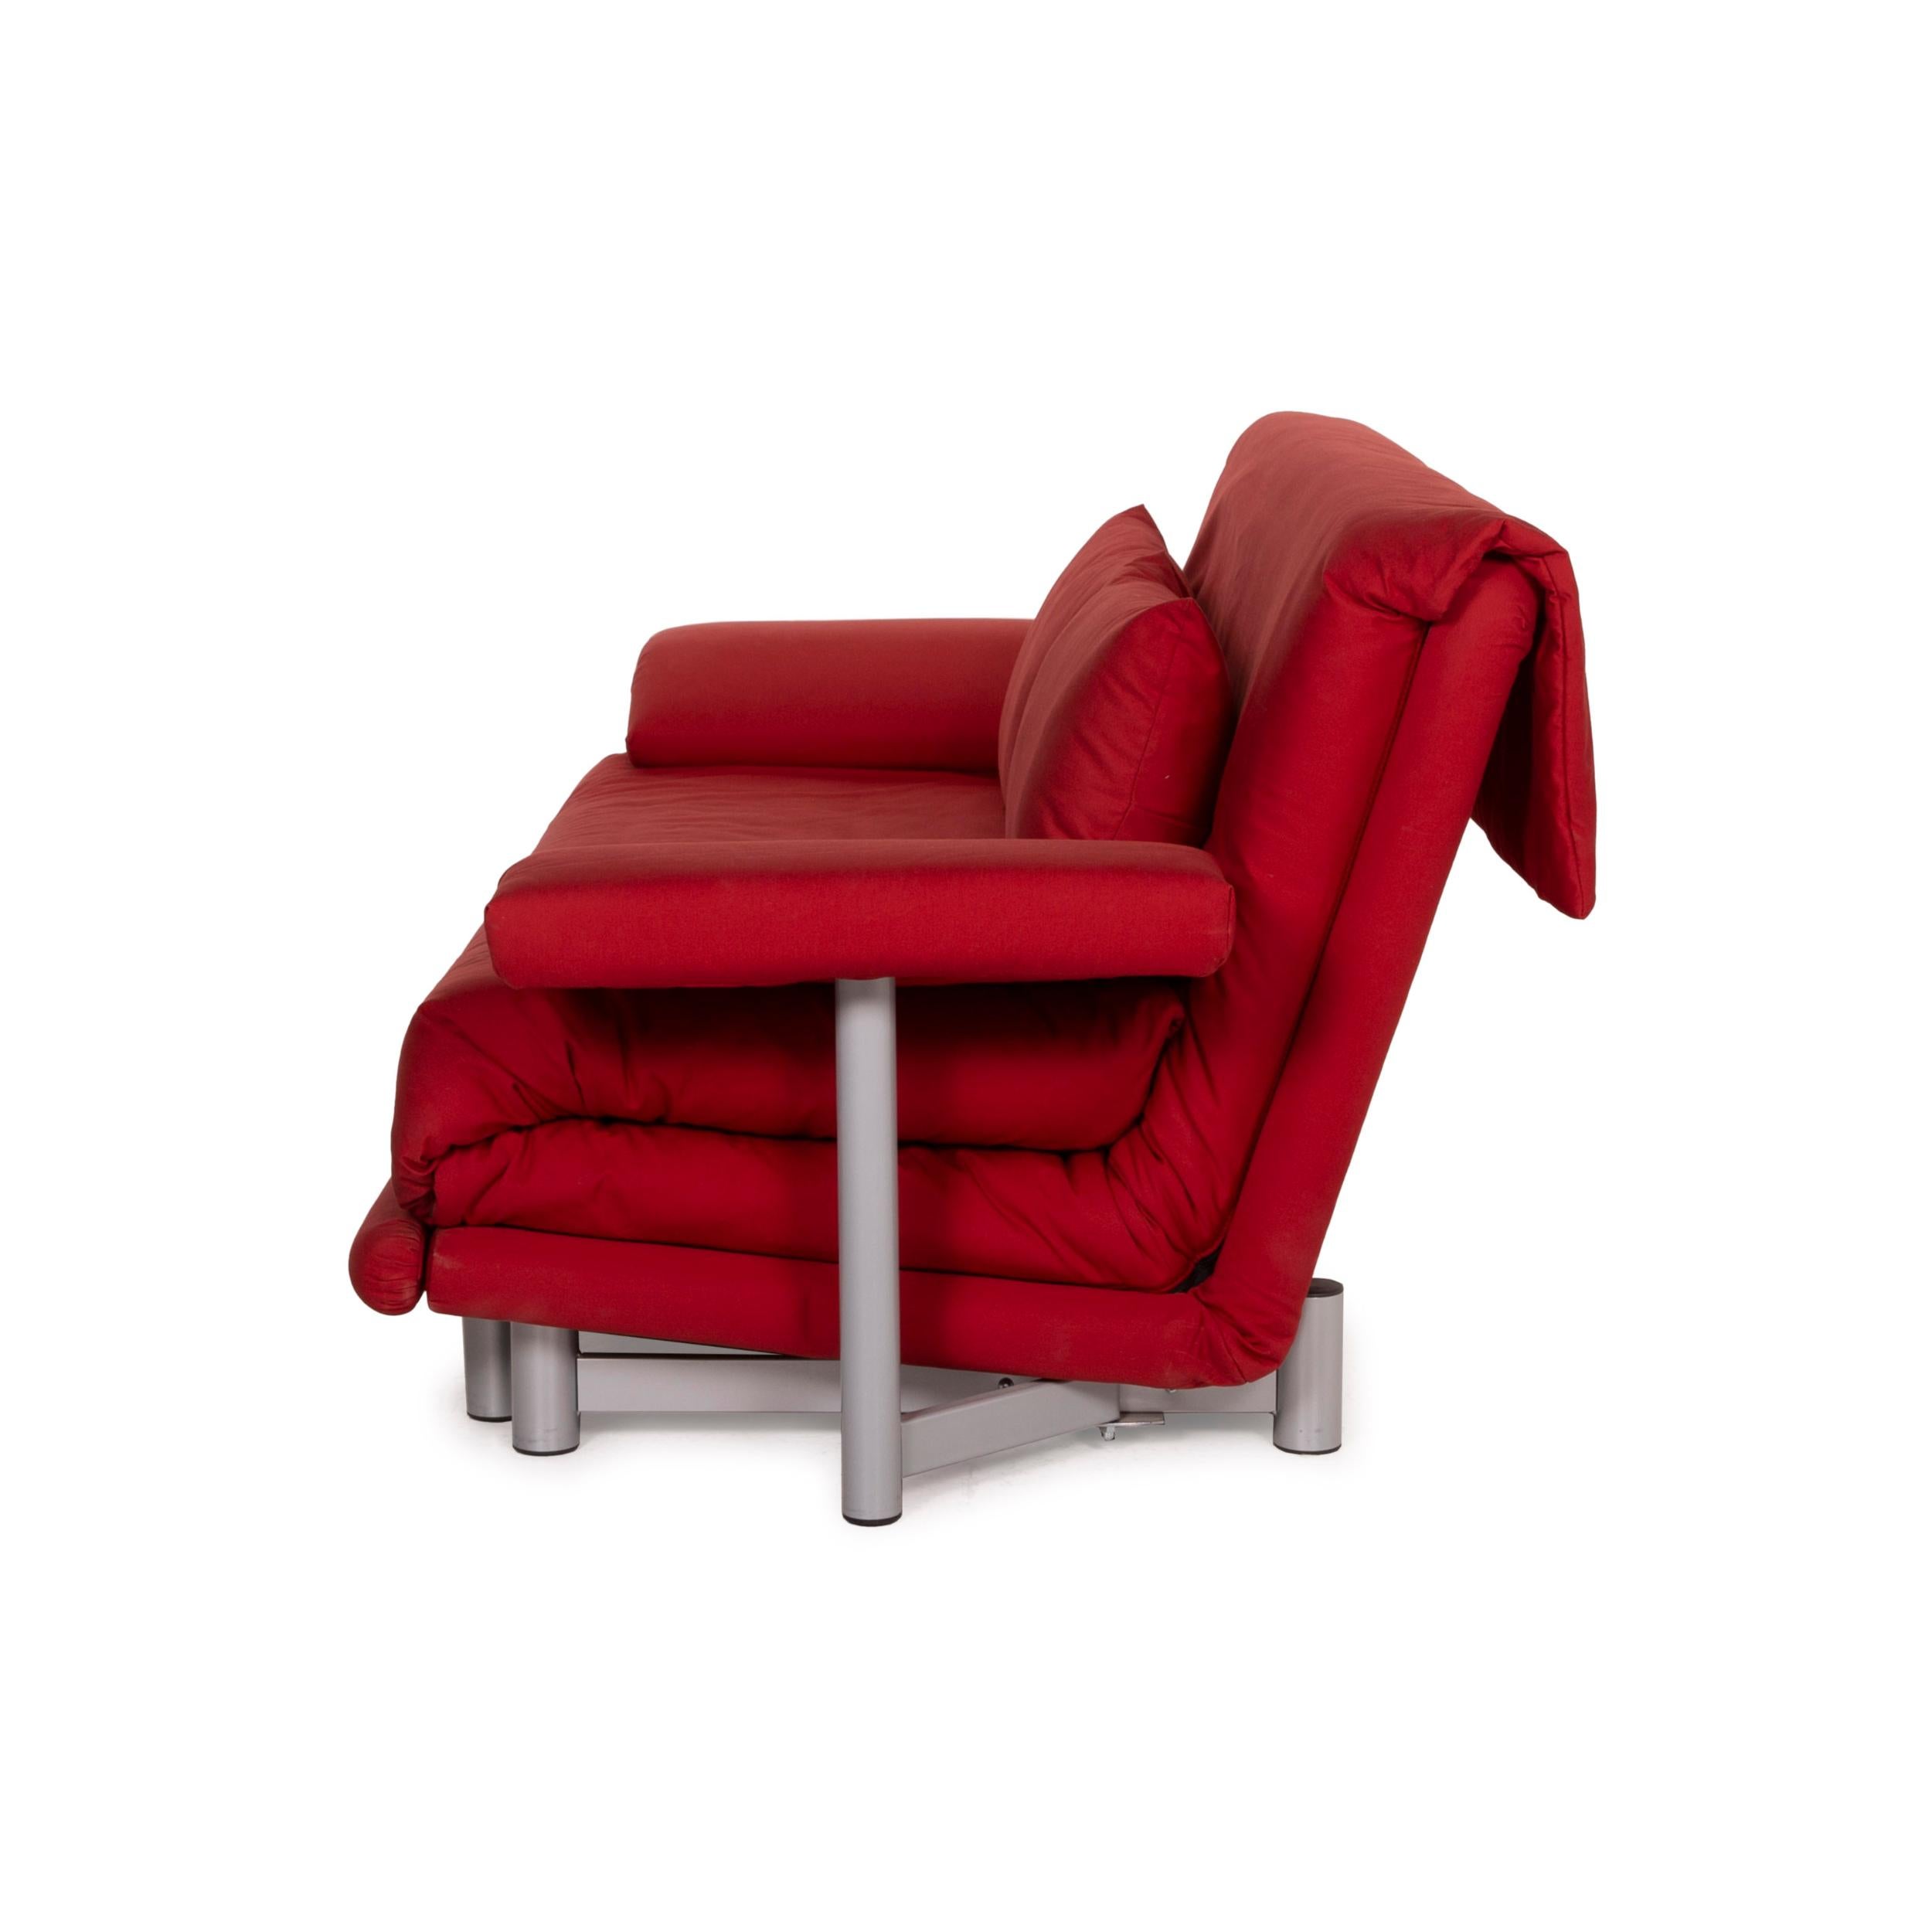 Ligne Roset Multy Fabric Sofa Red Two-Seater Sleeping Function Sofa Bed 2